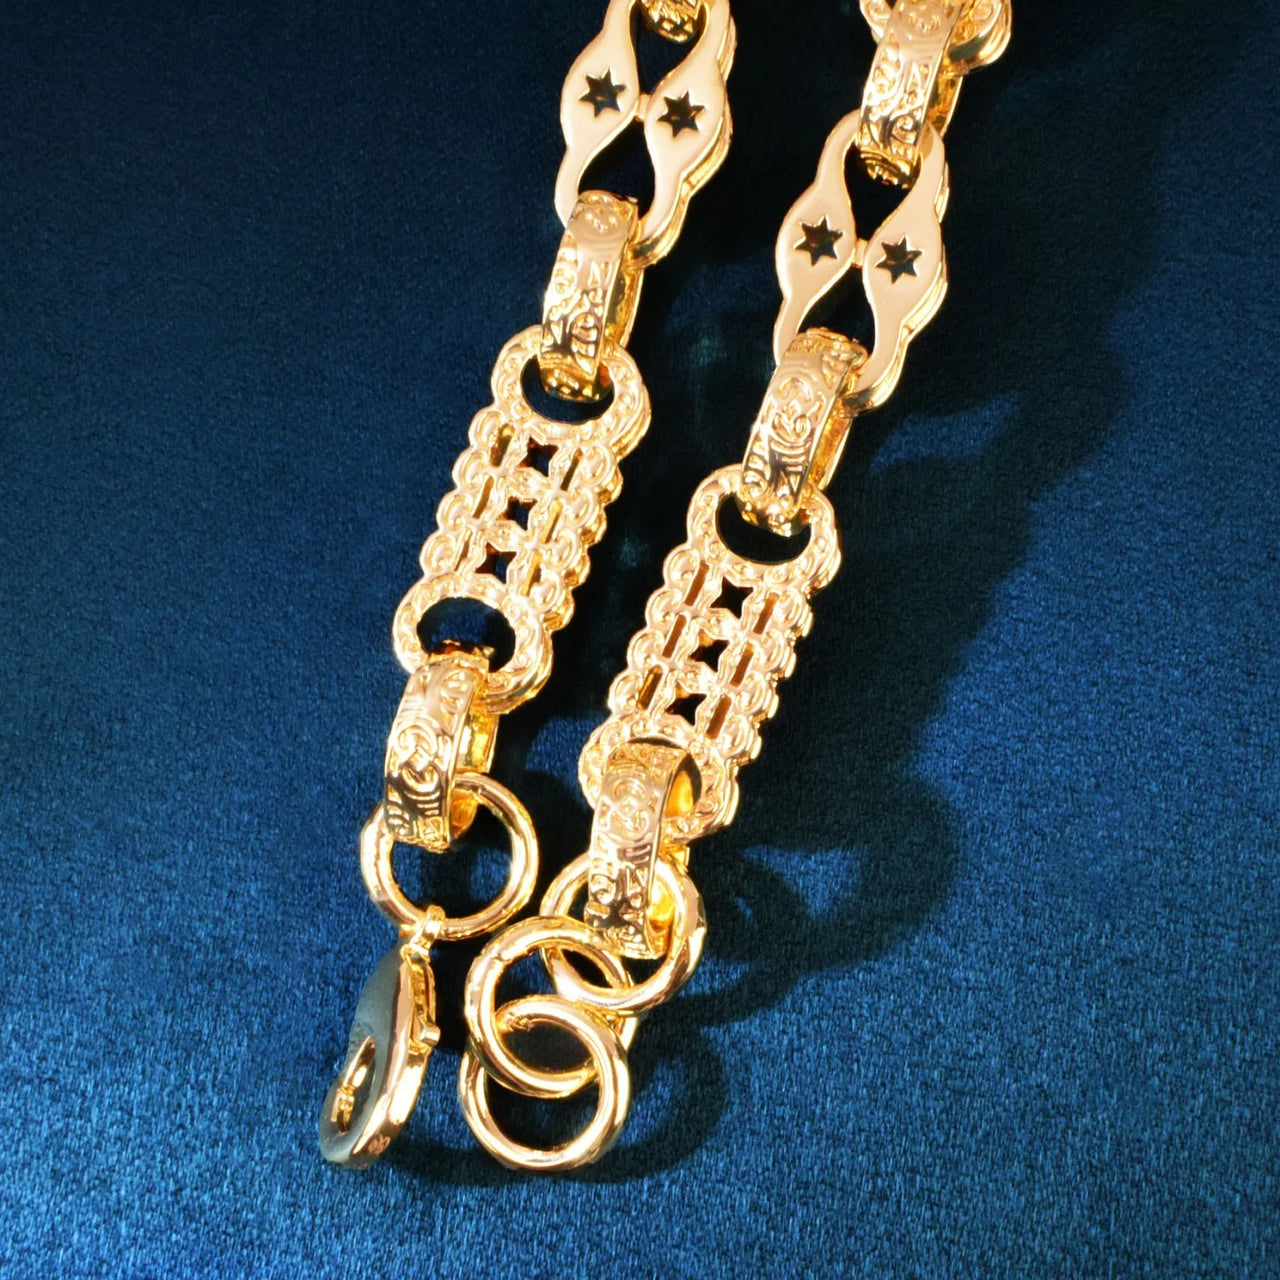 10mm Solid Pulley Link Bracelet - Different Drips